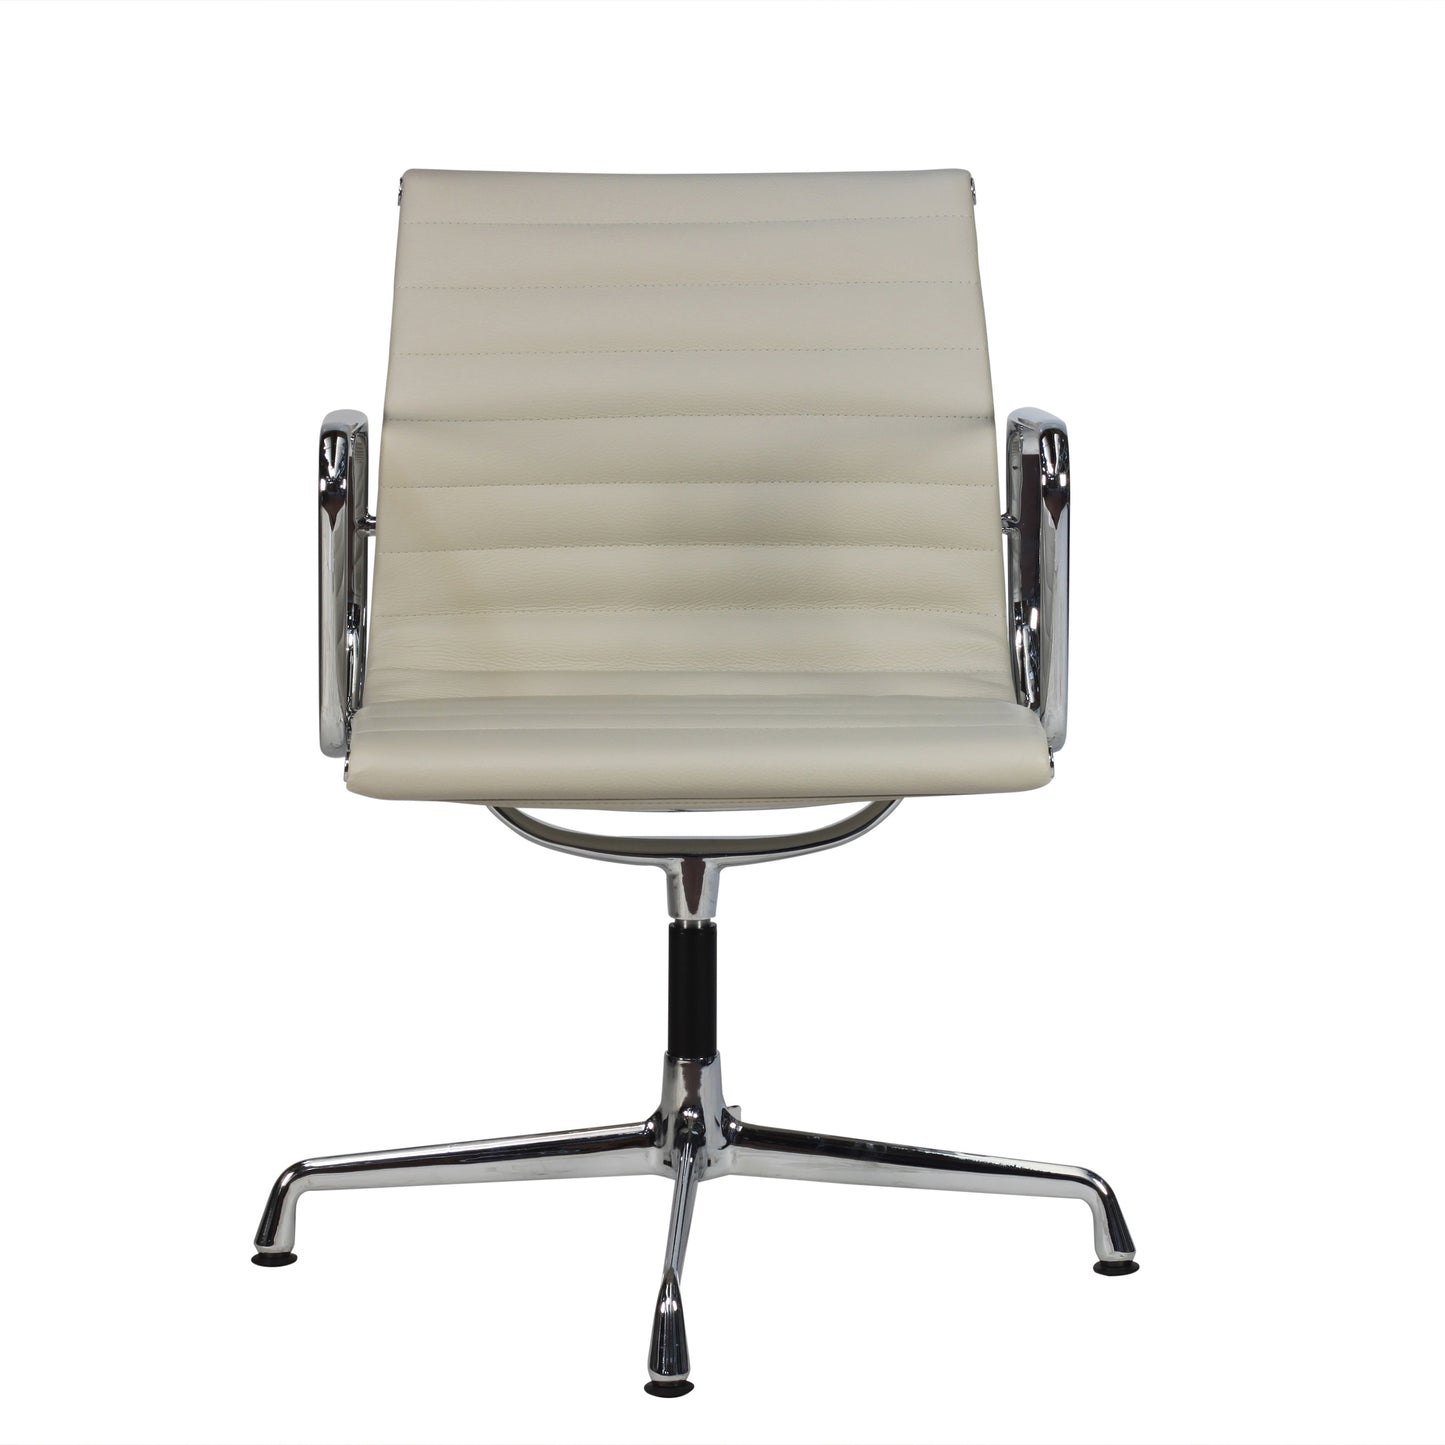 Chair without wheels aluminium style | Milk Leather | Front